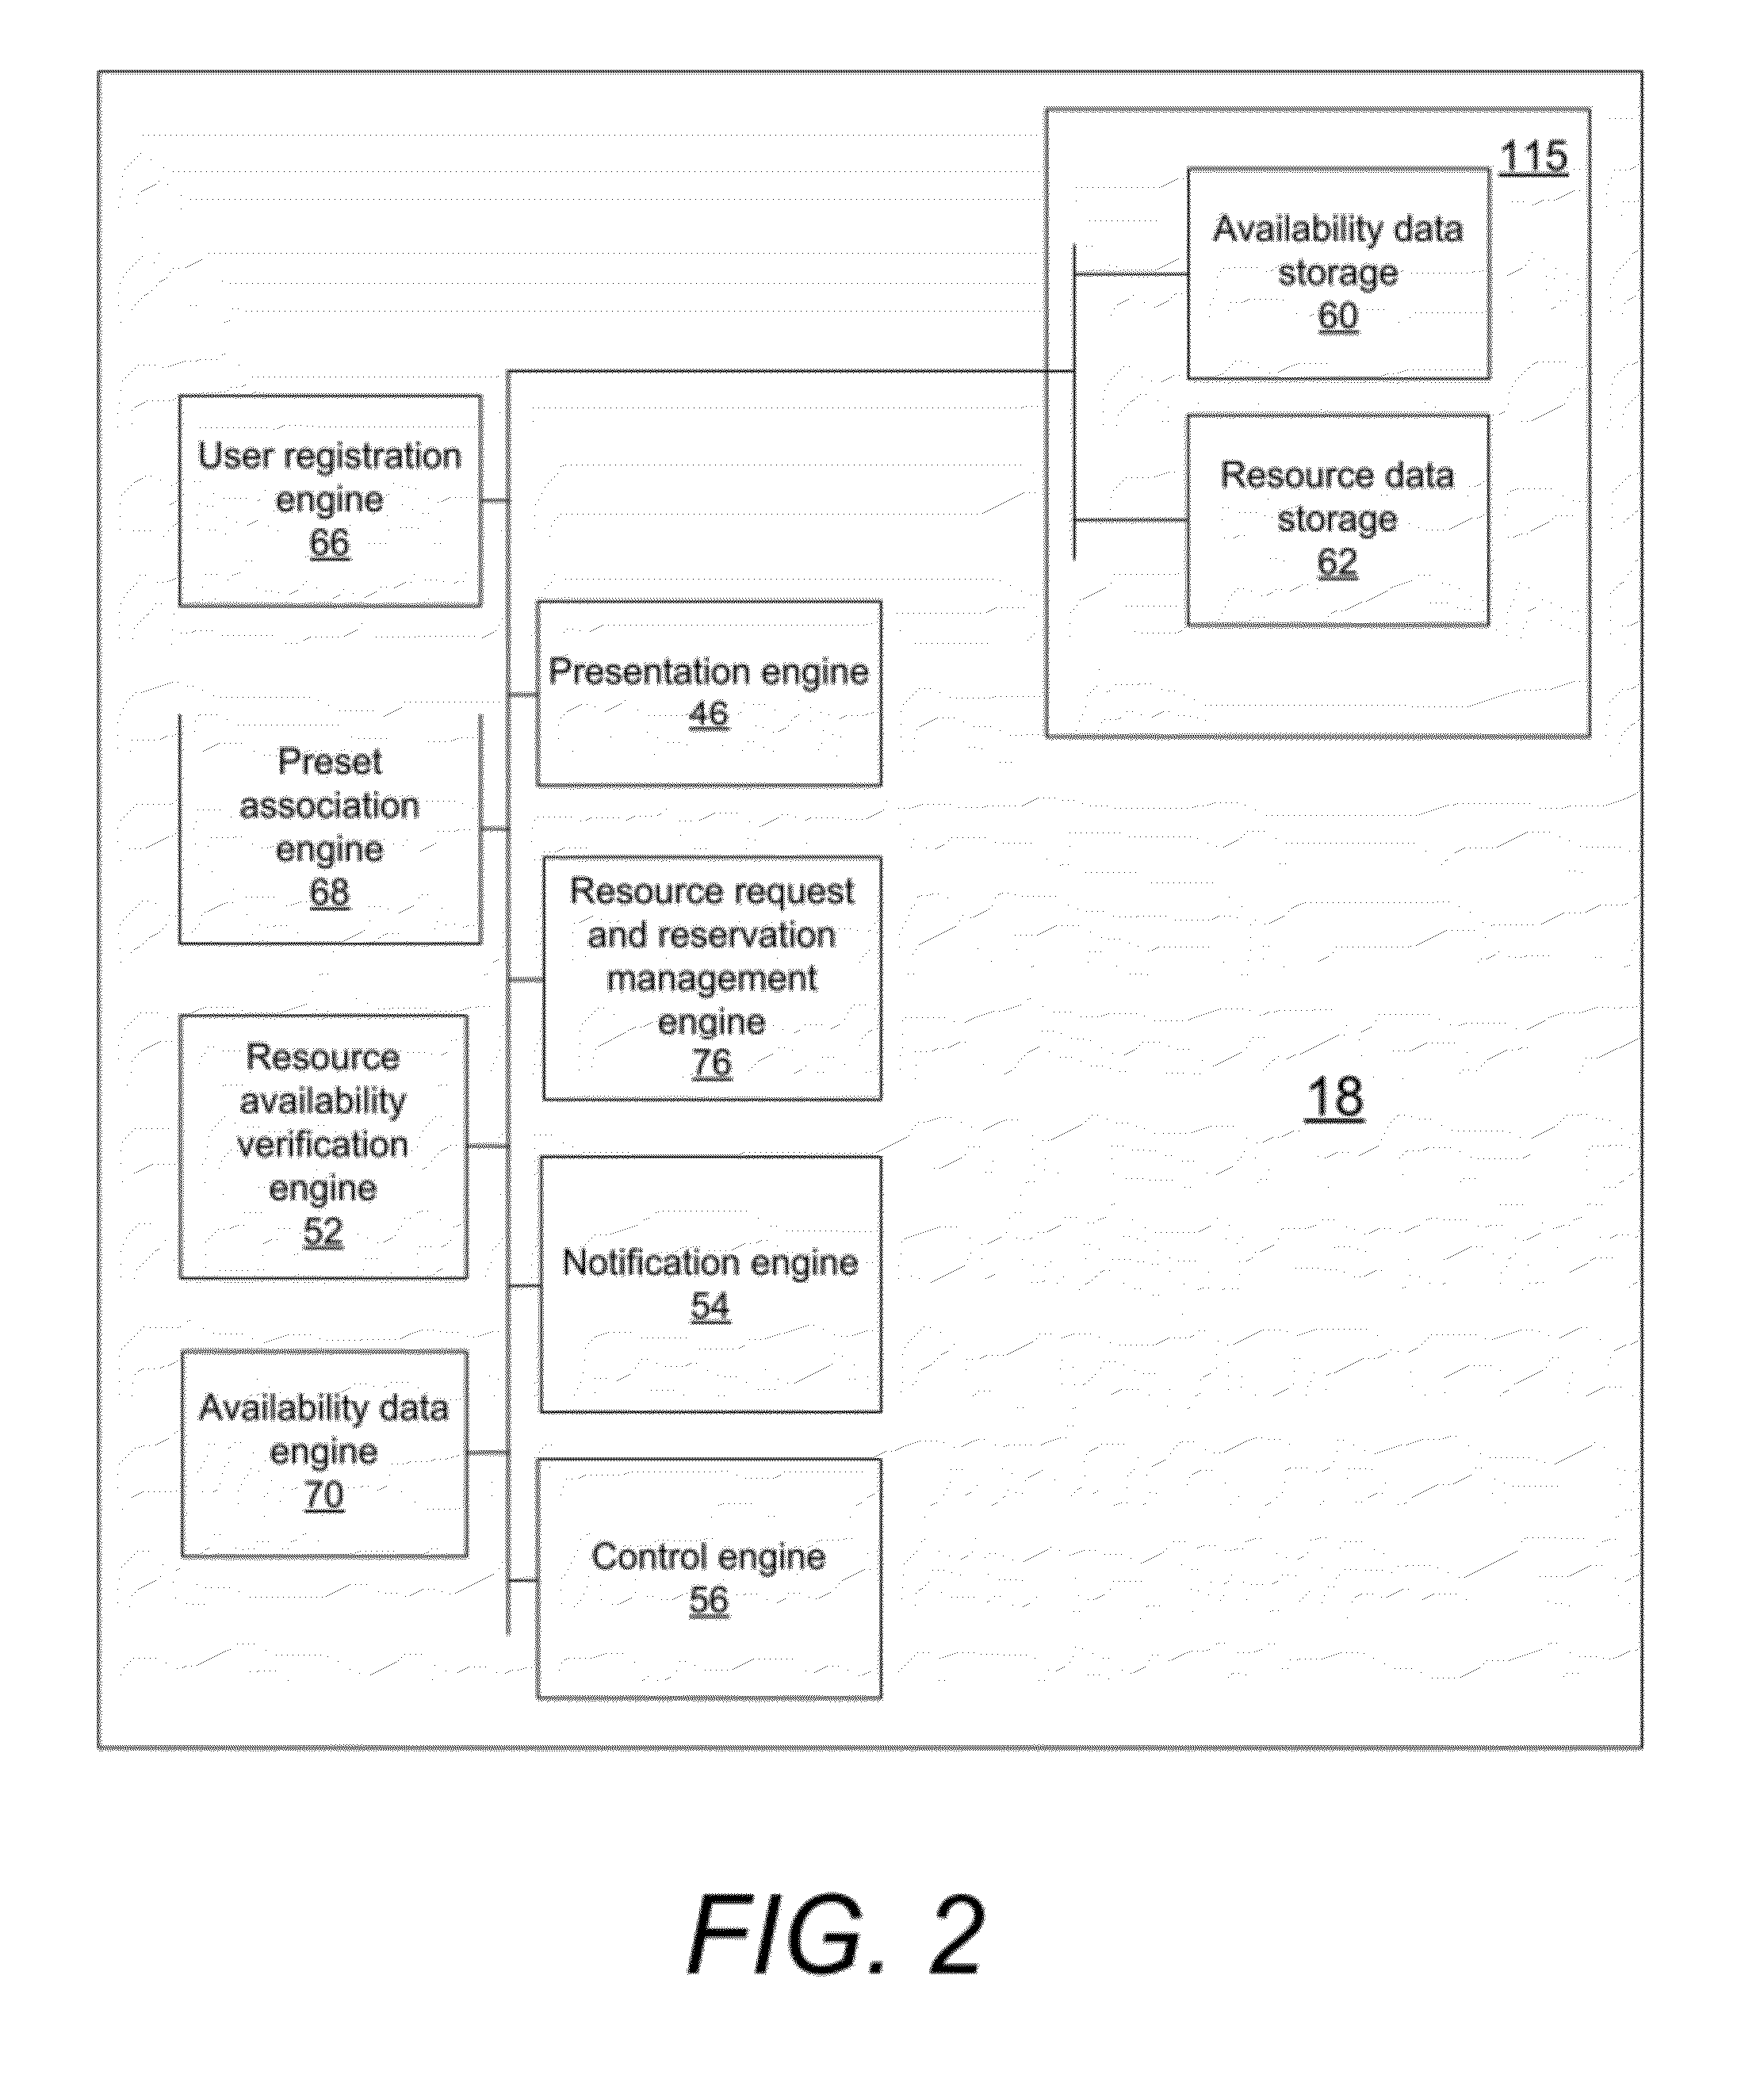 Meeting Management System Including Automated Equipment Setup